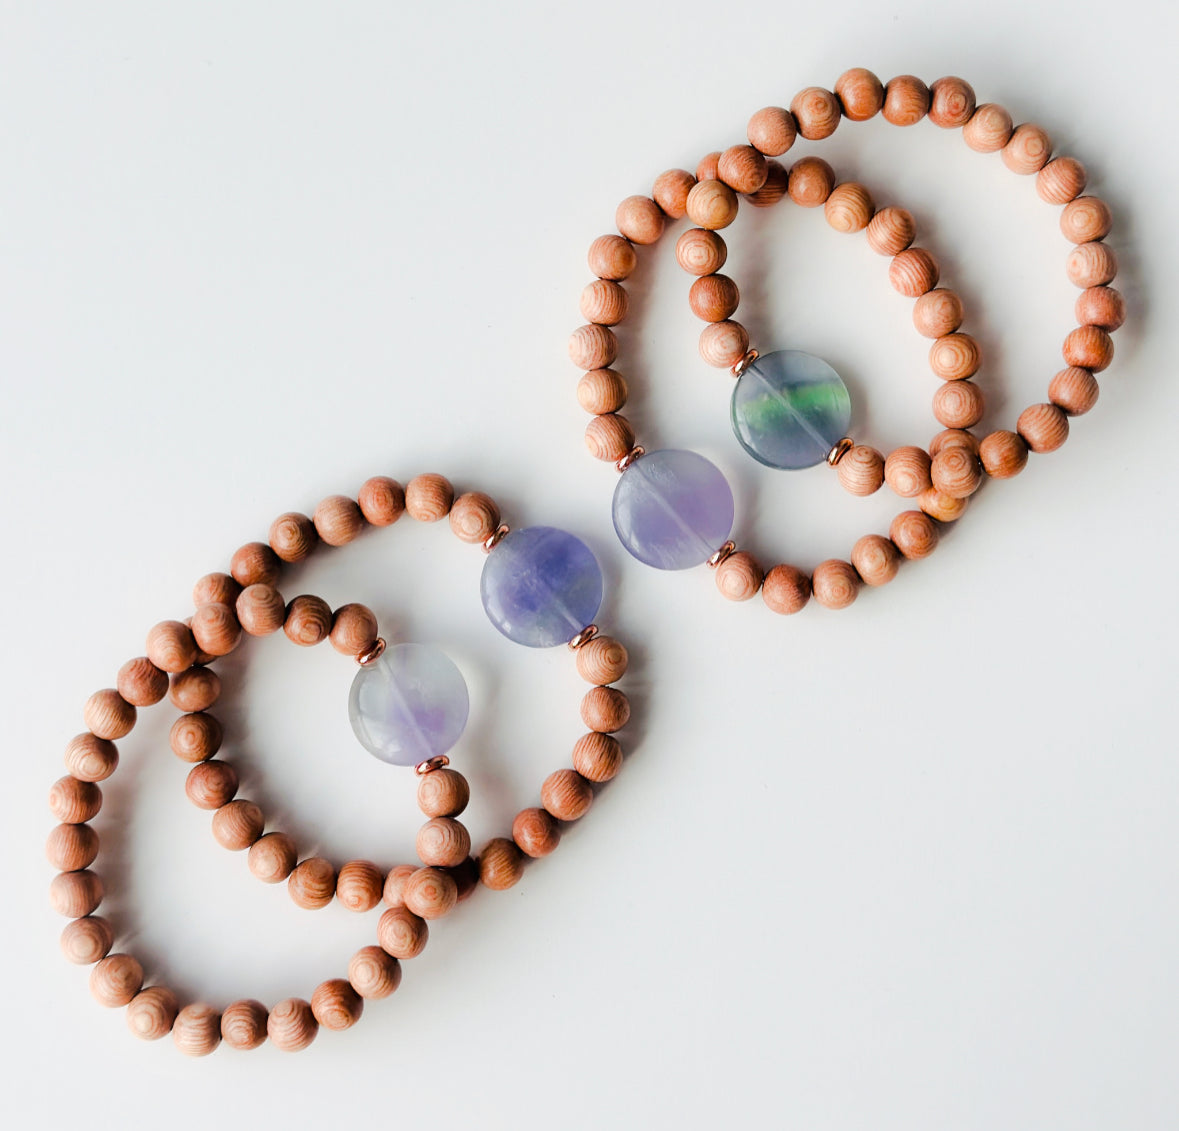 Rosewood bracelet with a Fluorite focal bead